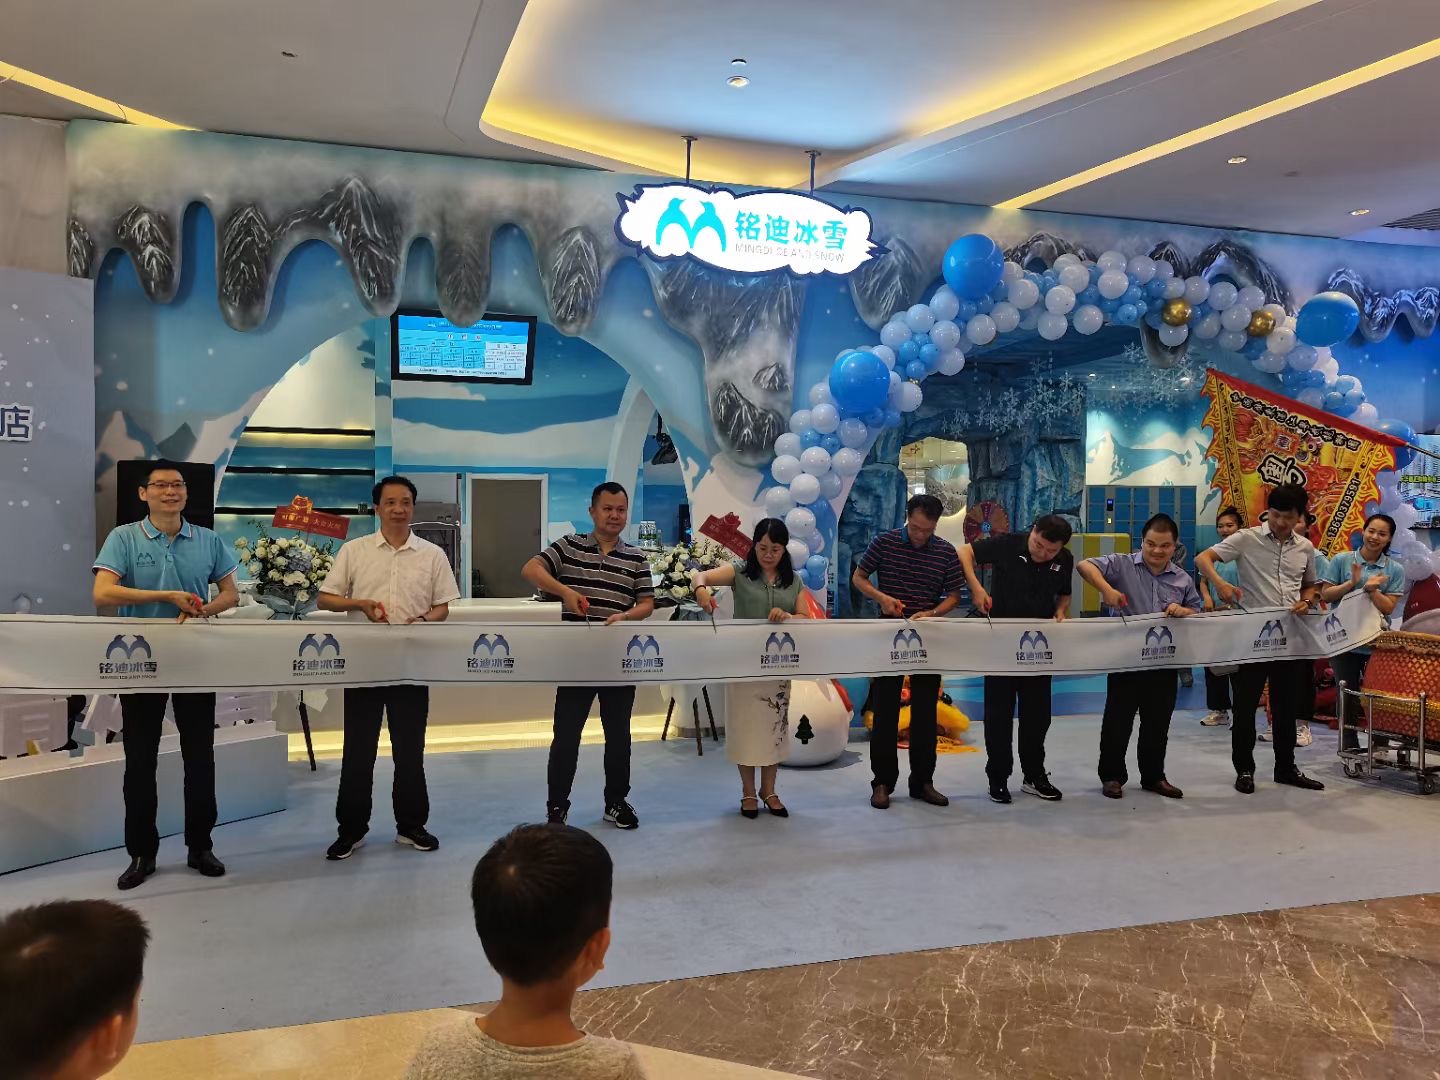 Warm congratulations on the grand trial operation of Zhanjiang store of Mingdi ice and snow paradise on May 22